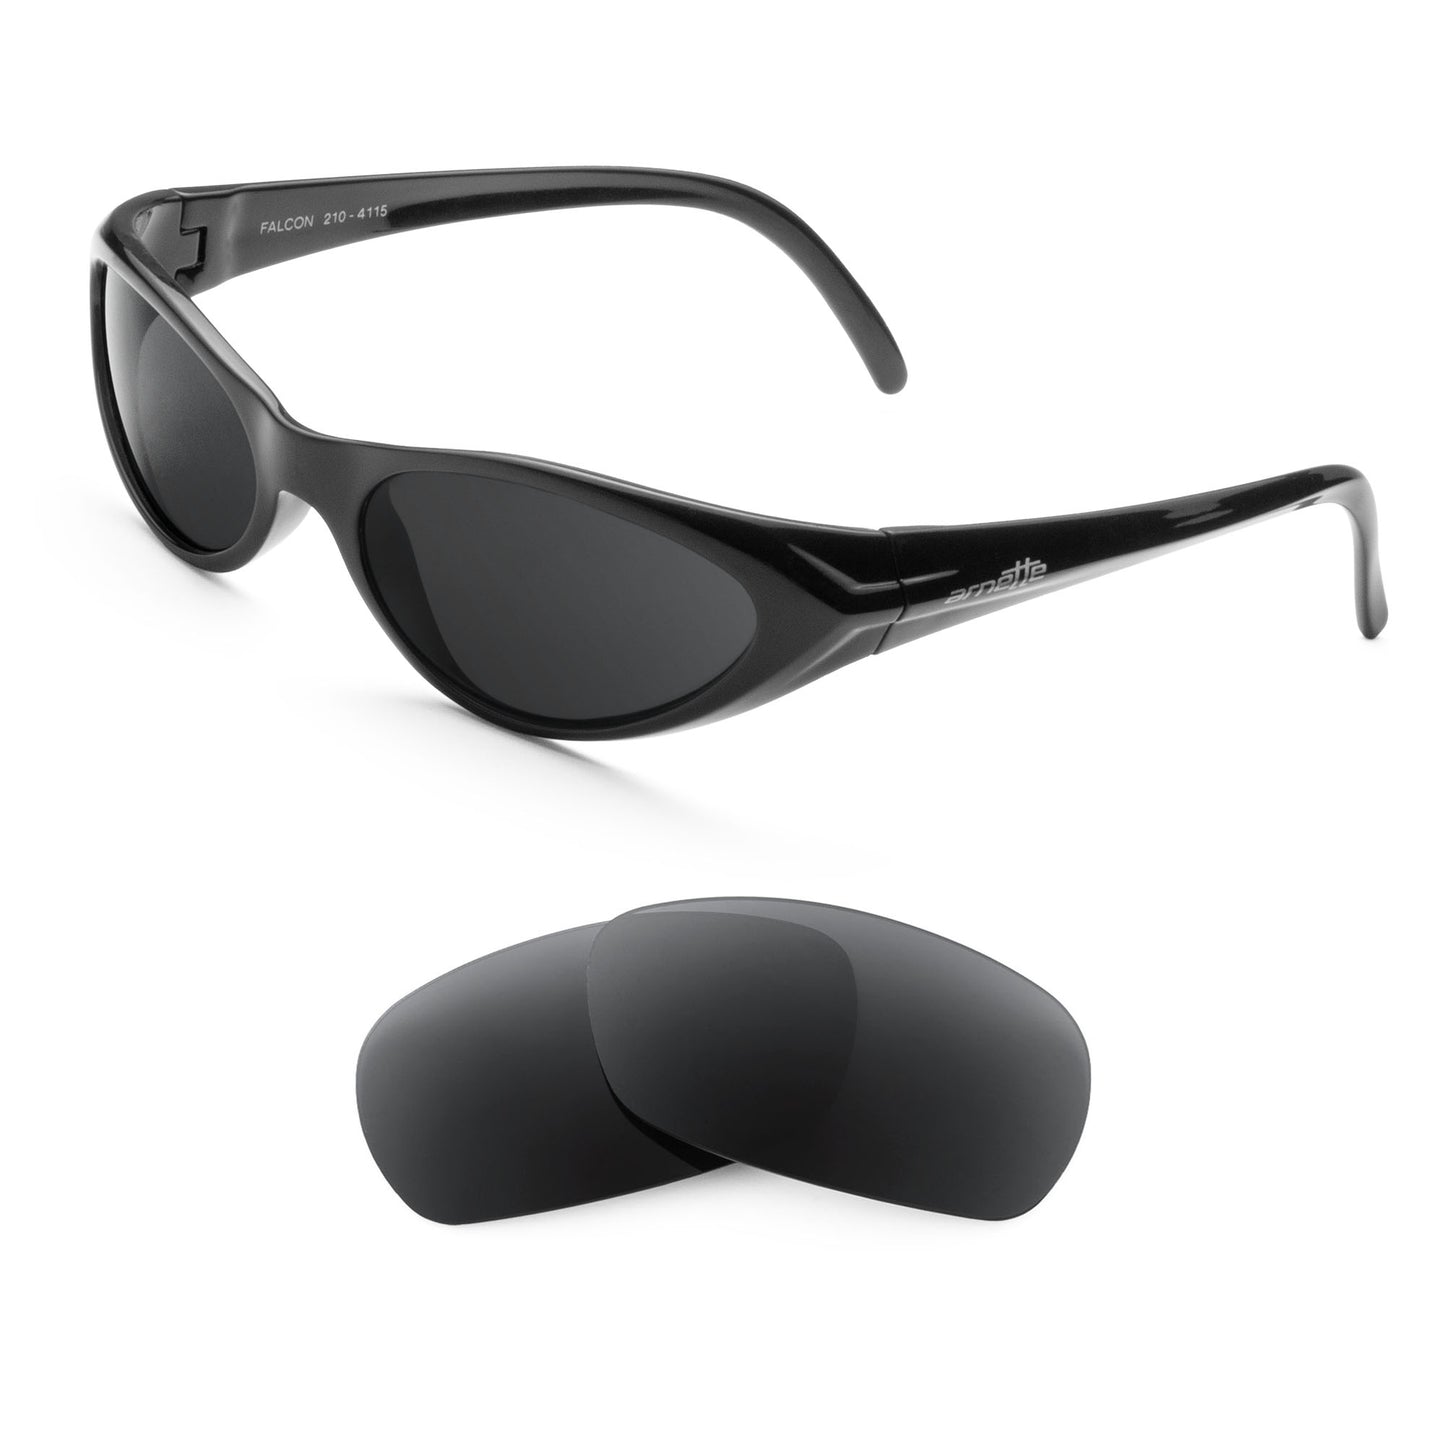 Arnette Falcon AN210 sunglasses with replacement lenses